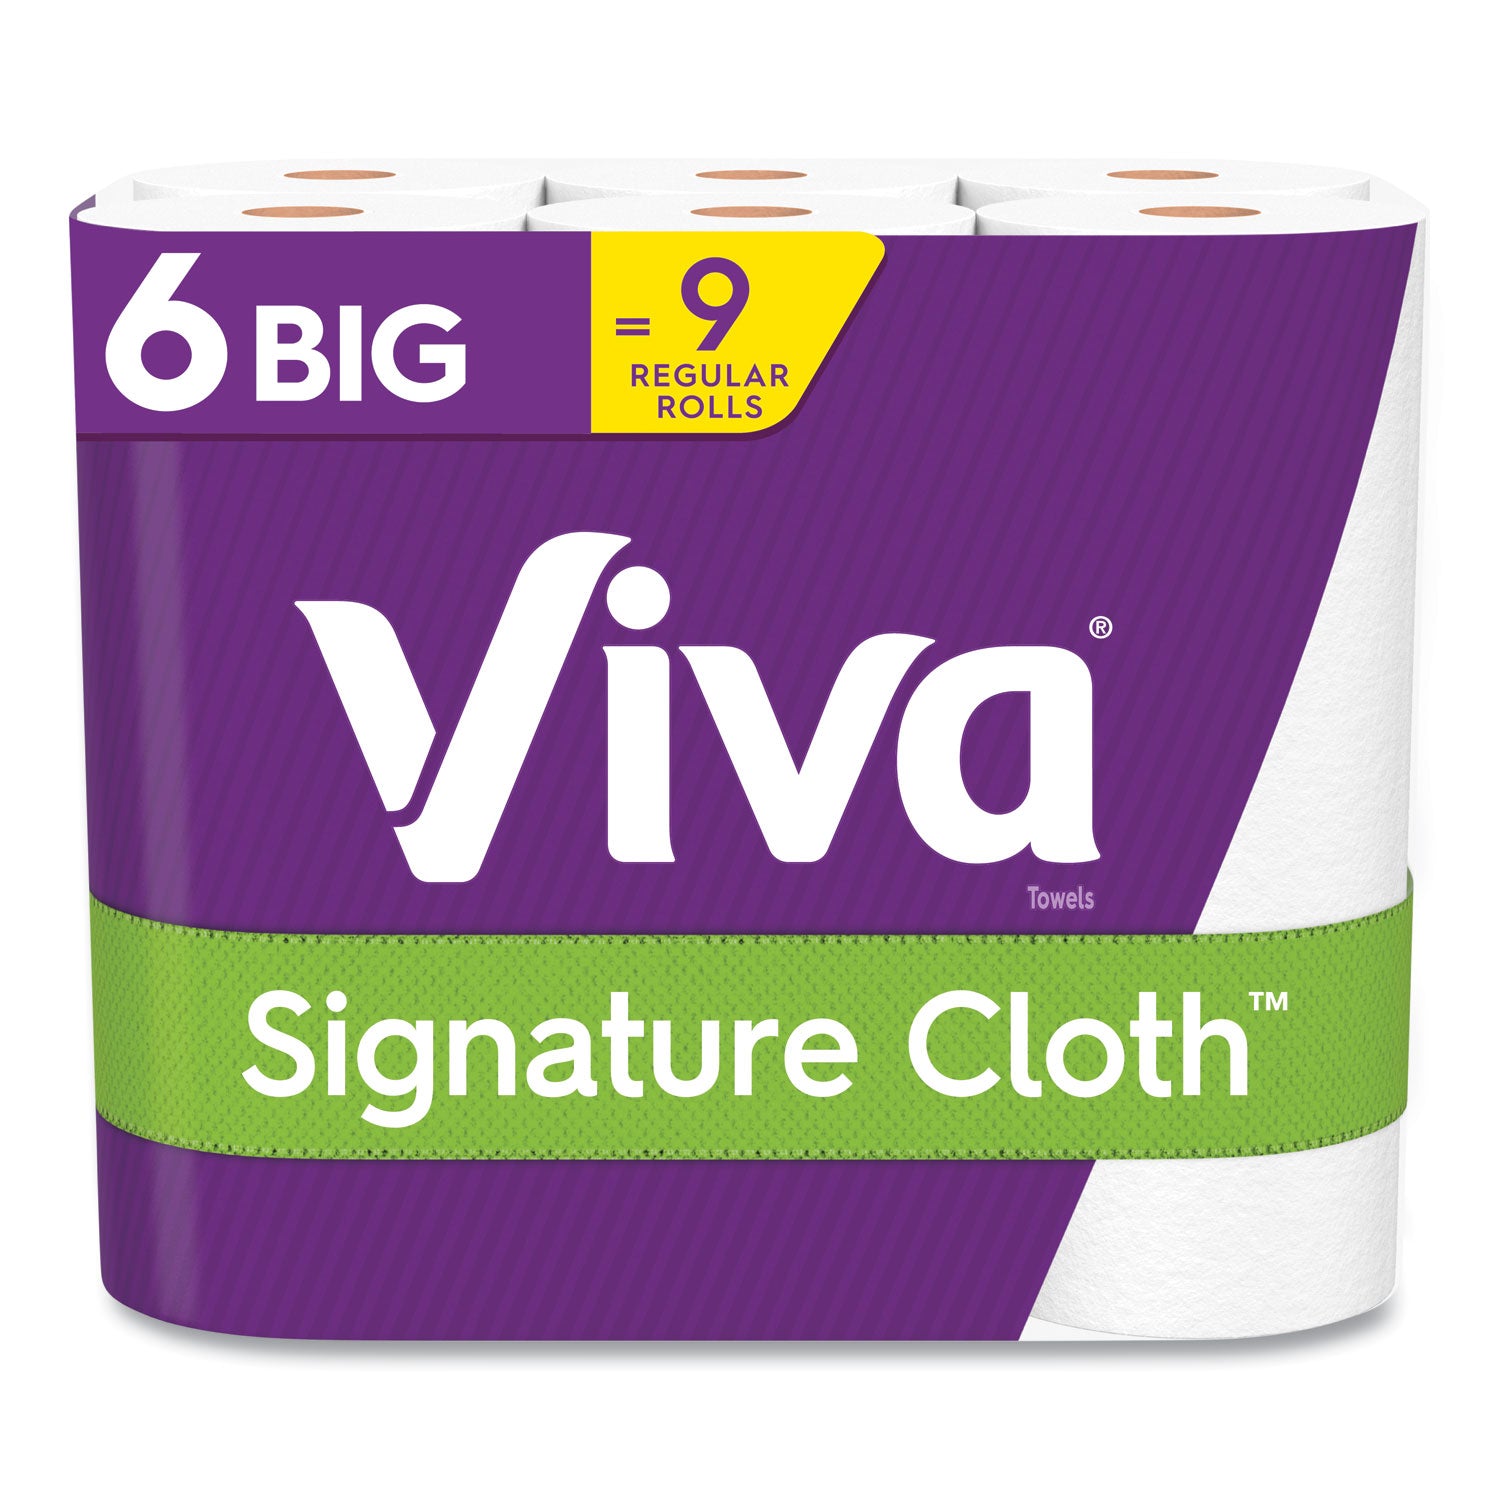 signature-cloth-choose-a-sheet-kitchen-roll-paper-towels-1-ply-11-x-59-white-70-sheets-roll-6-roll-pack-4-packs-carton_kcc54869 - 1